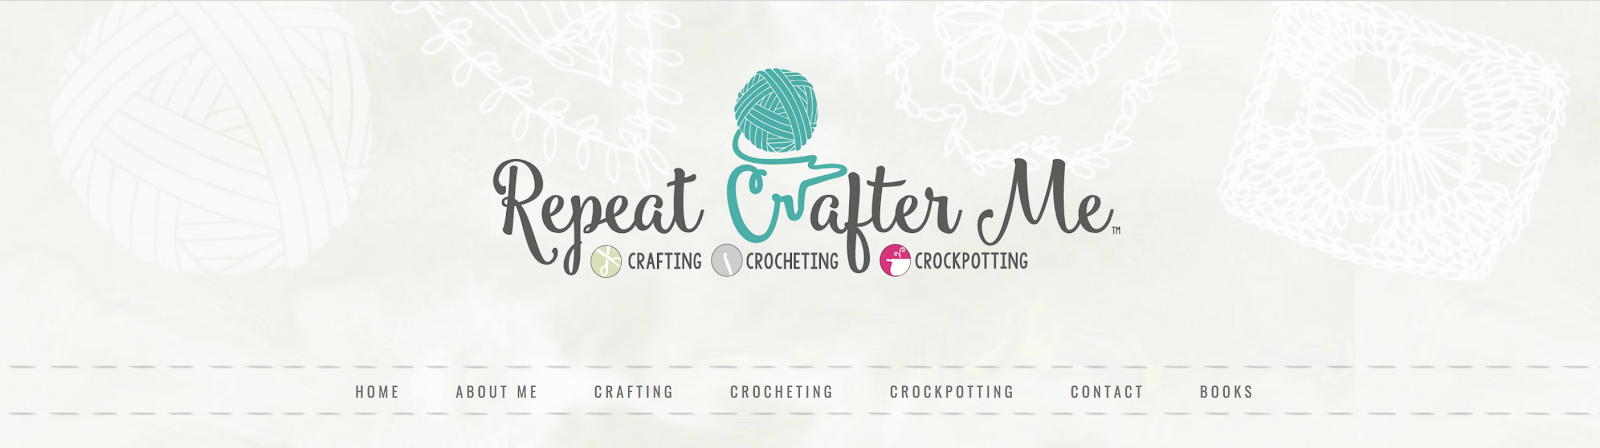 Repeat Crafter Me Creative Example of a Good Name for a Blog